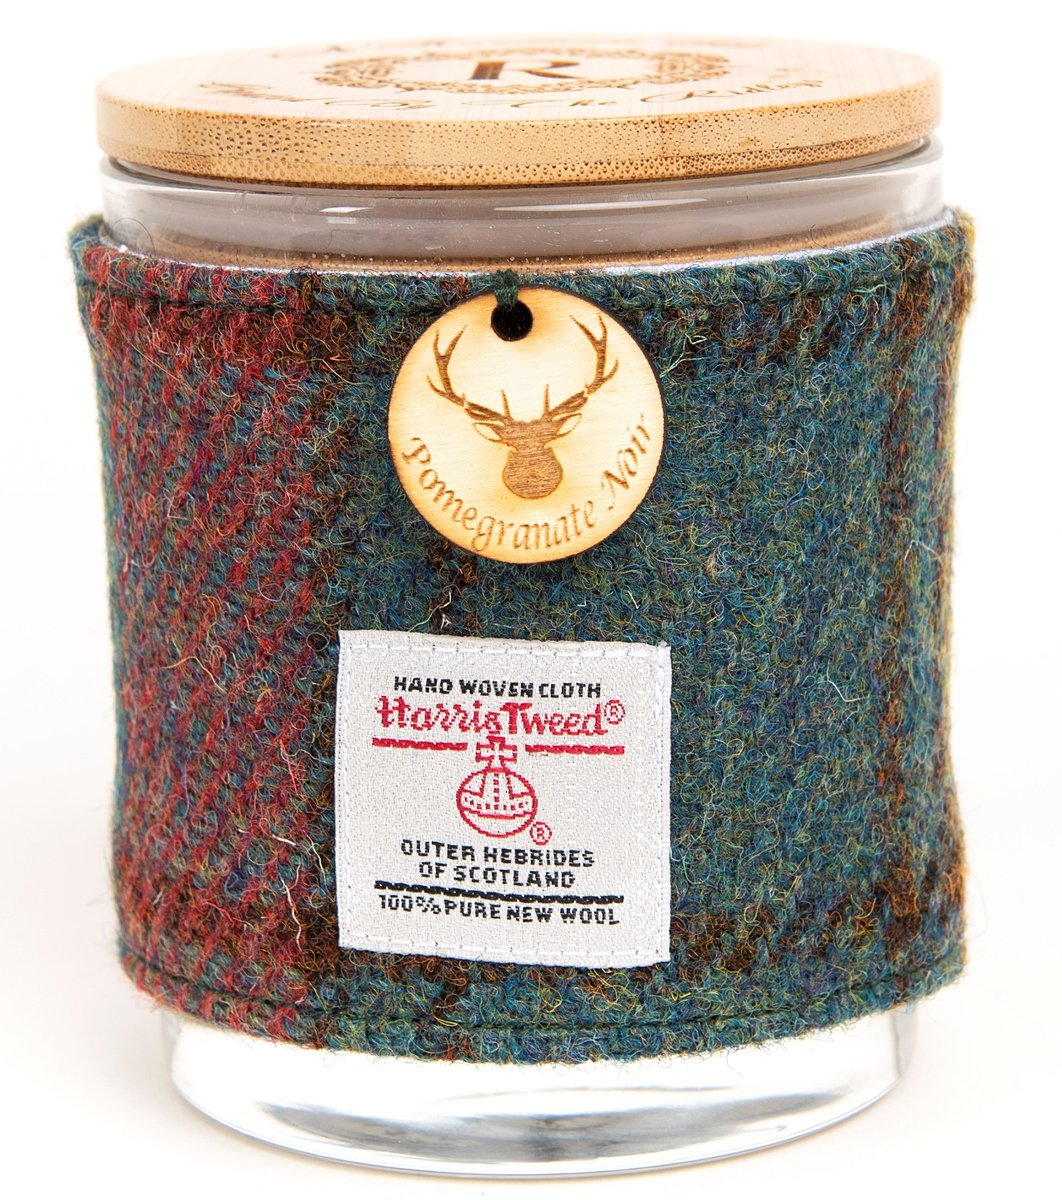 🍁🕯️ Unveil cosy allure with our Pomegranate Noir soy candle! 🍒🖤 Wrapped in stunning Harris Tweed, it's pure elegance and cosy vibes. Illuminate your space with this captivating scent. #pomegranatenoir nights! 🌙🍂 #harristweedcandles #harristweed #tweed #pomegranatenoir